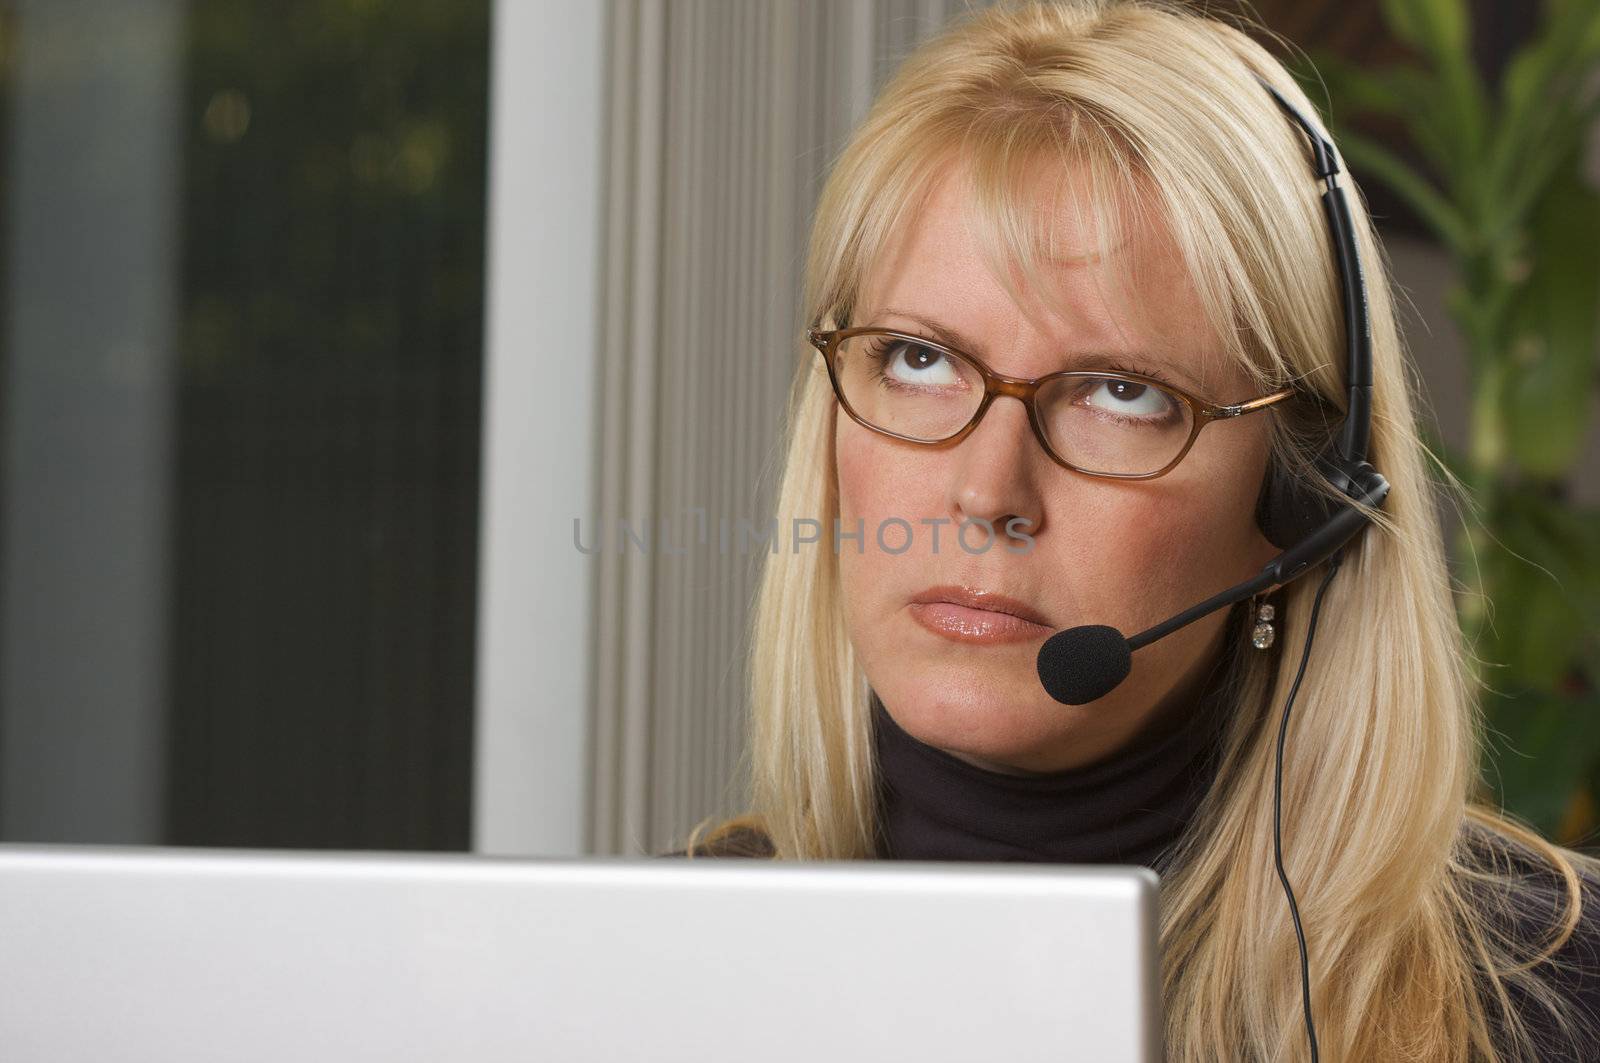 Attractive businesswoman shows signs of boredom while on her phone headset.